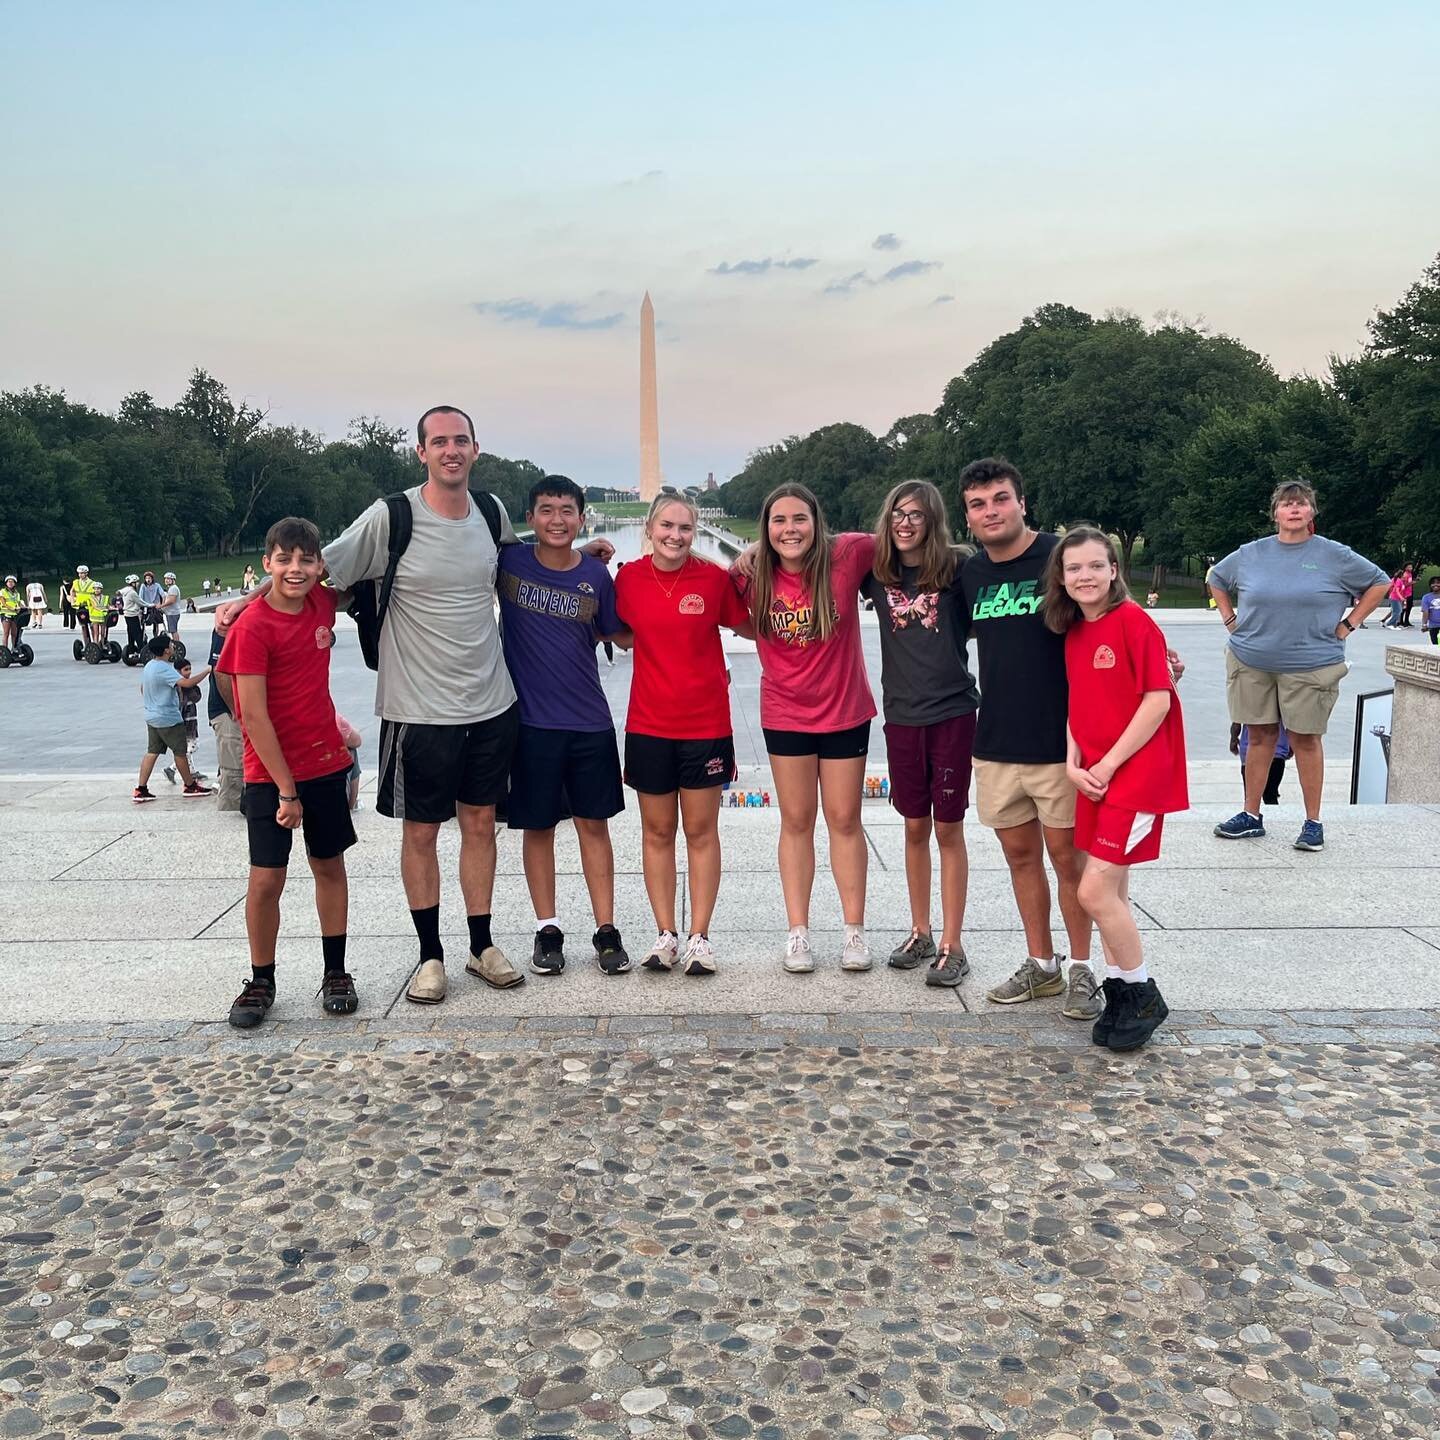 Our D.C. mission team had an amazing time last week! We did some gardening, yard work, and got to hang out with some awesome kids at Children of Mine- and of course, went to Costco.